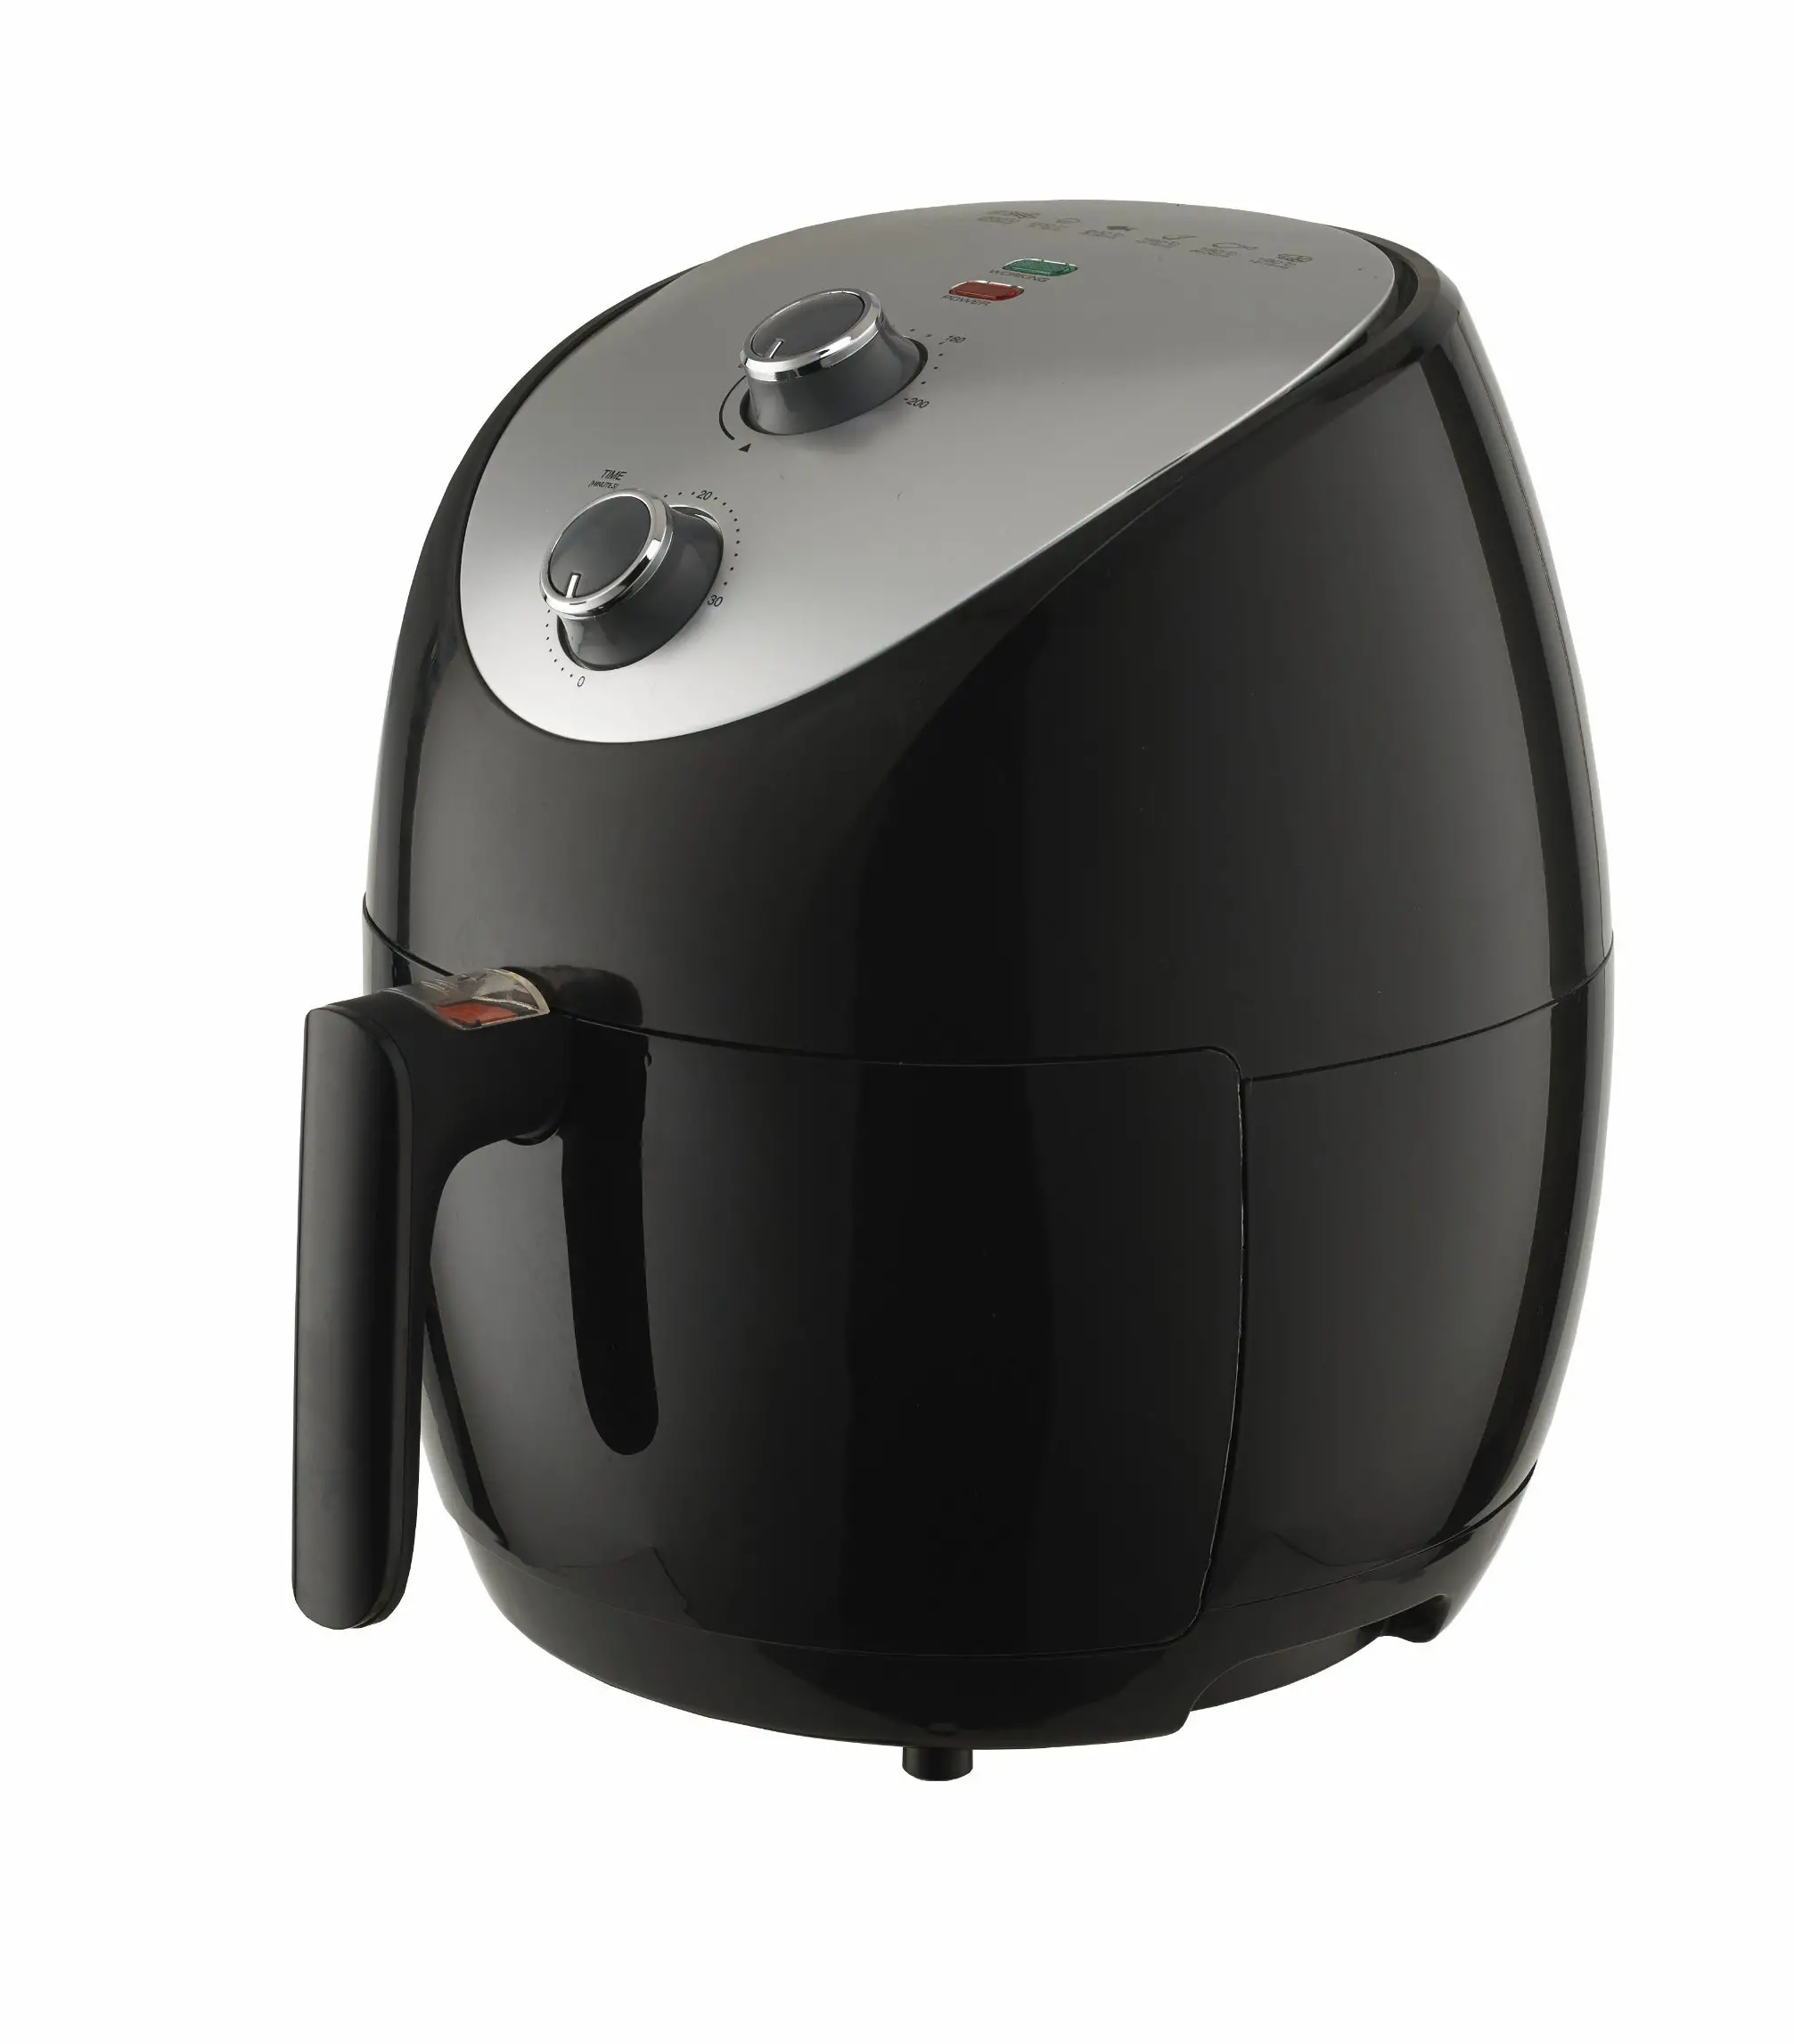 China 1500W 3.5 Liter Stainless Steel Air Fryer with ...